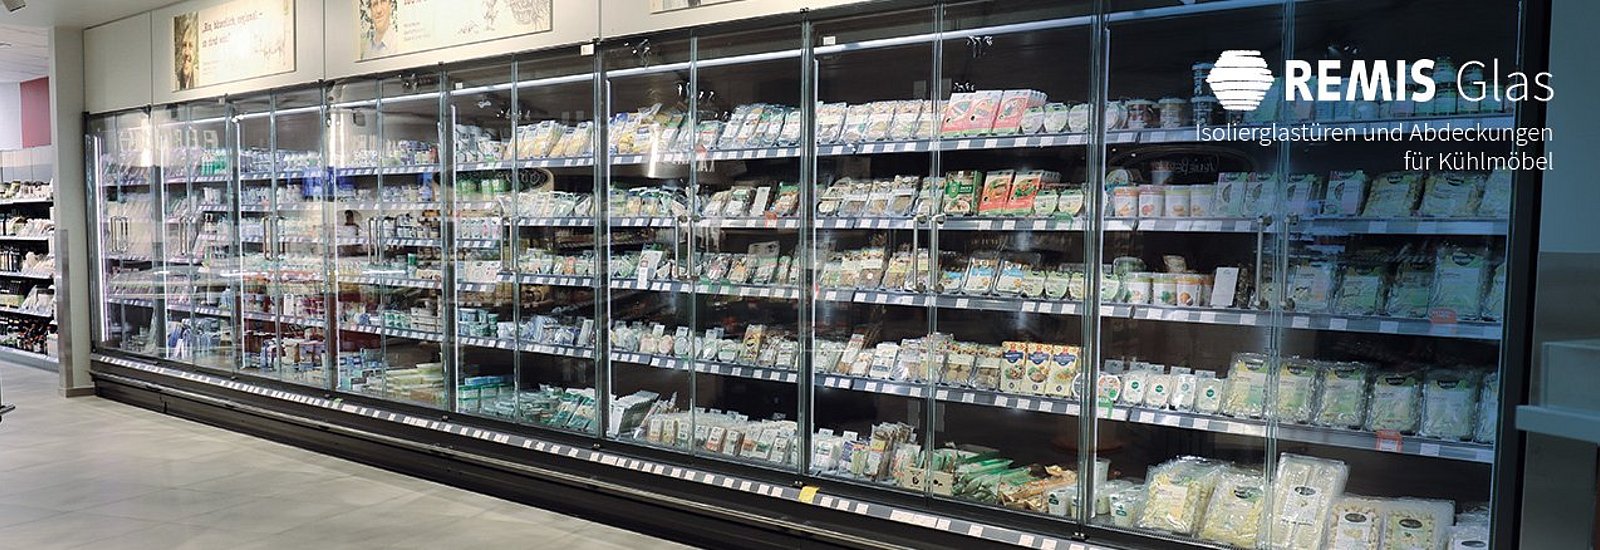 Insulating glass doors and covers from REMISglas: Our products for your refrigerated shelves and freezers